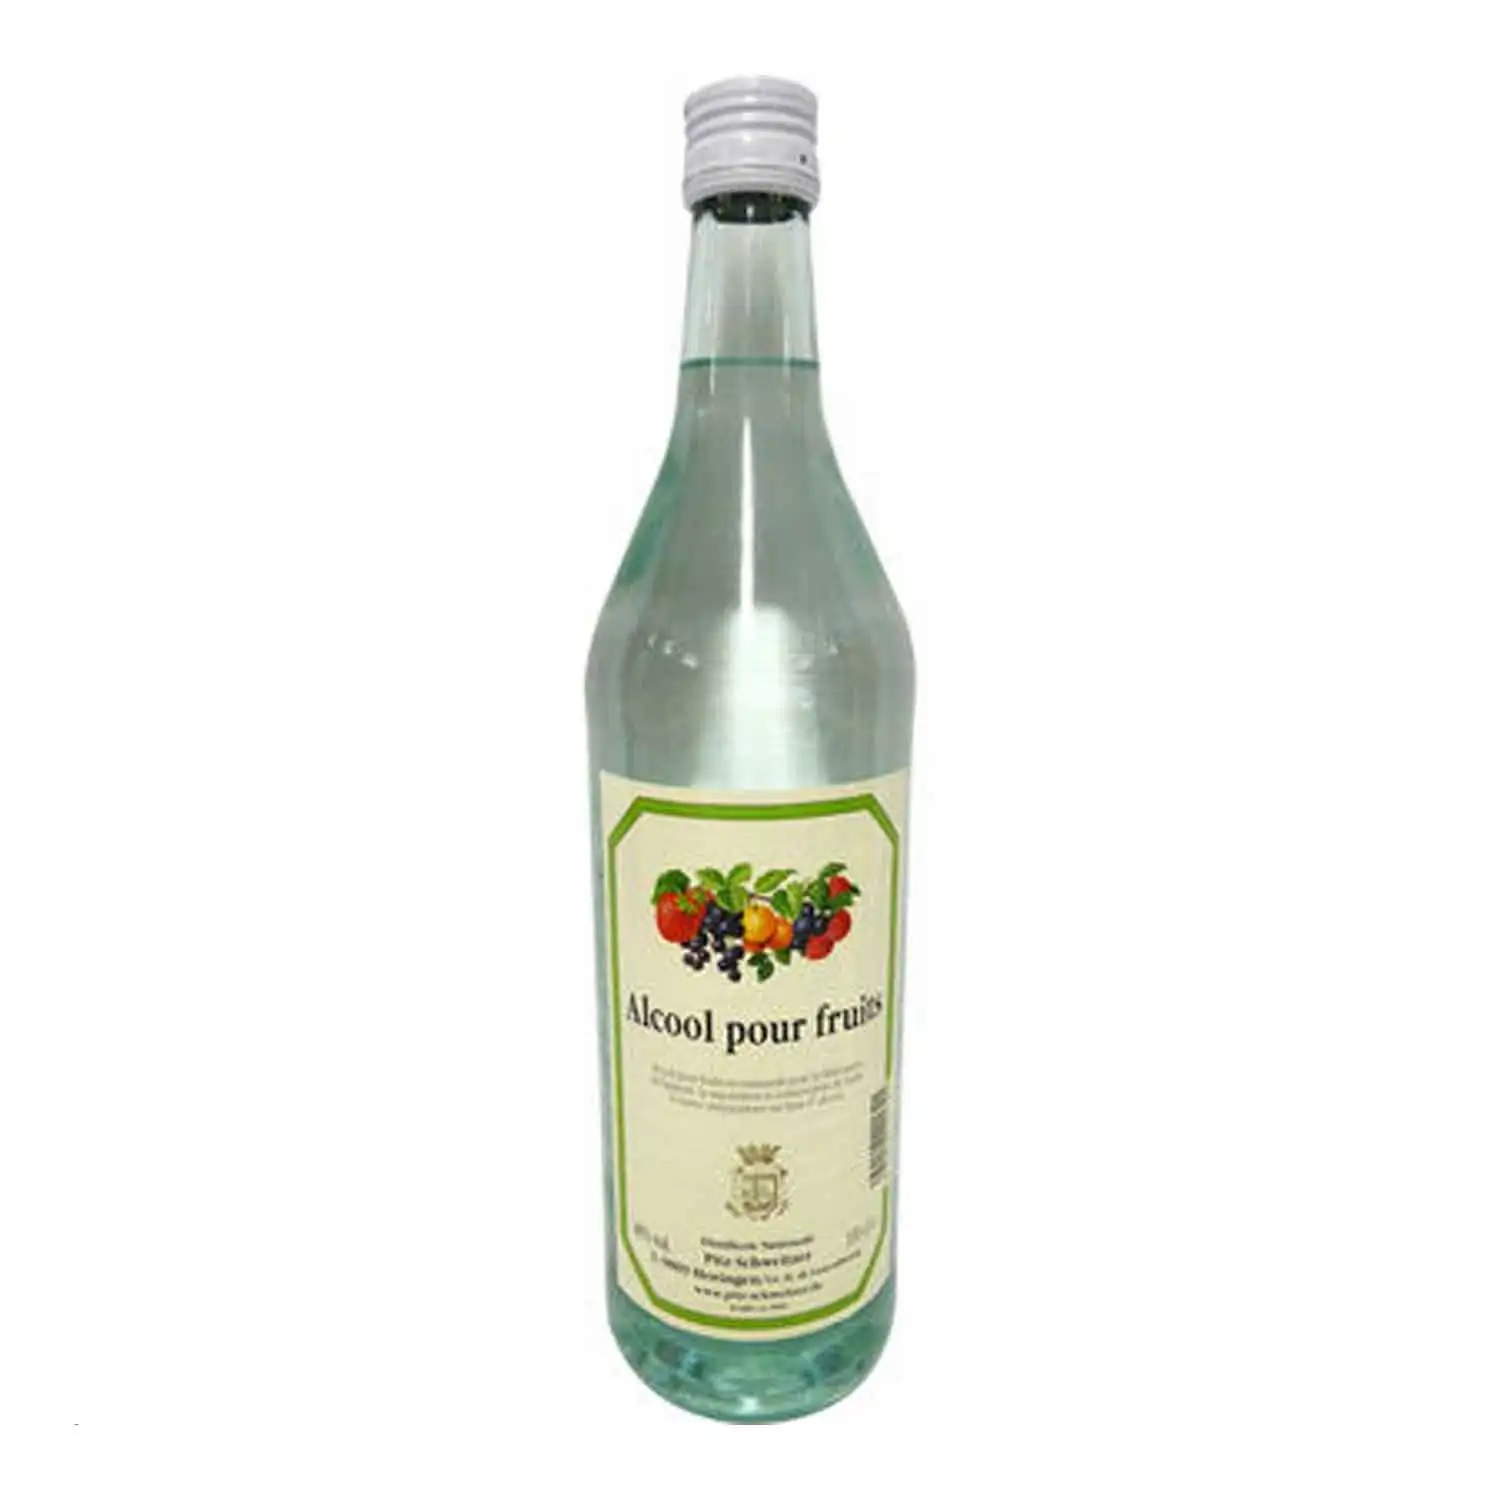 Alcool pour fruits 1l Alc 40% - Buy at Real Tobacco